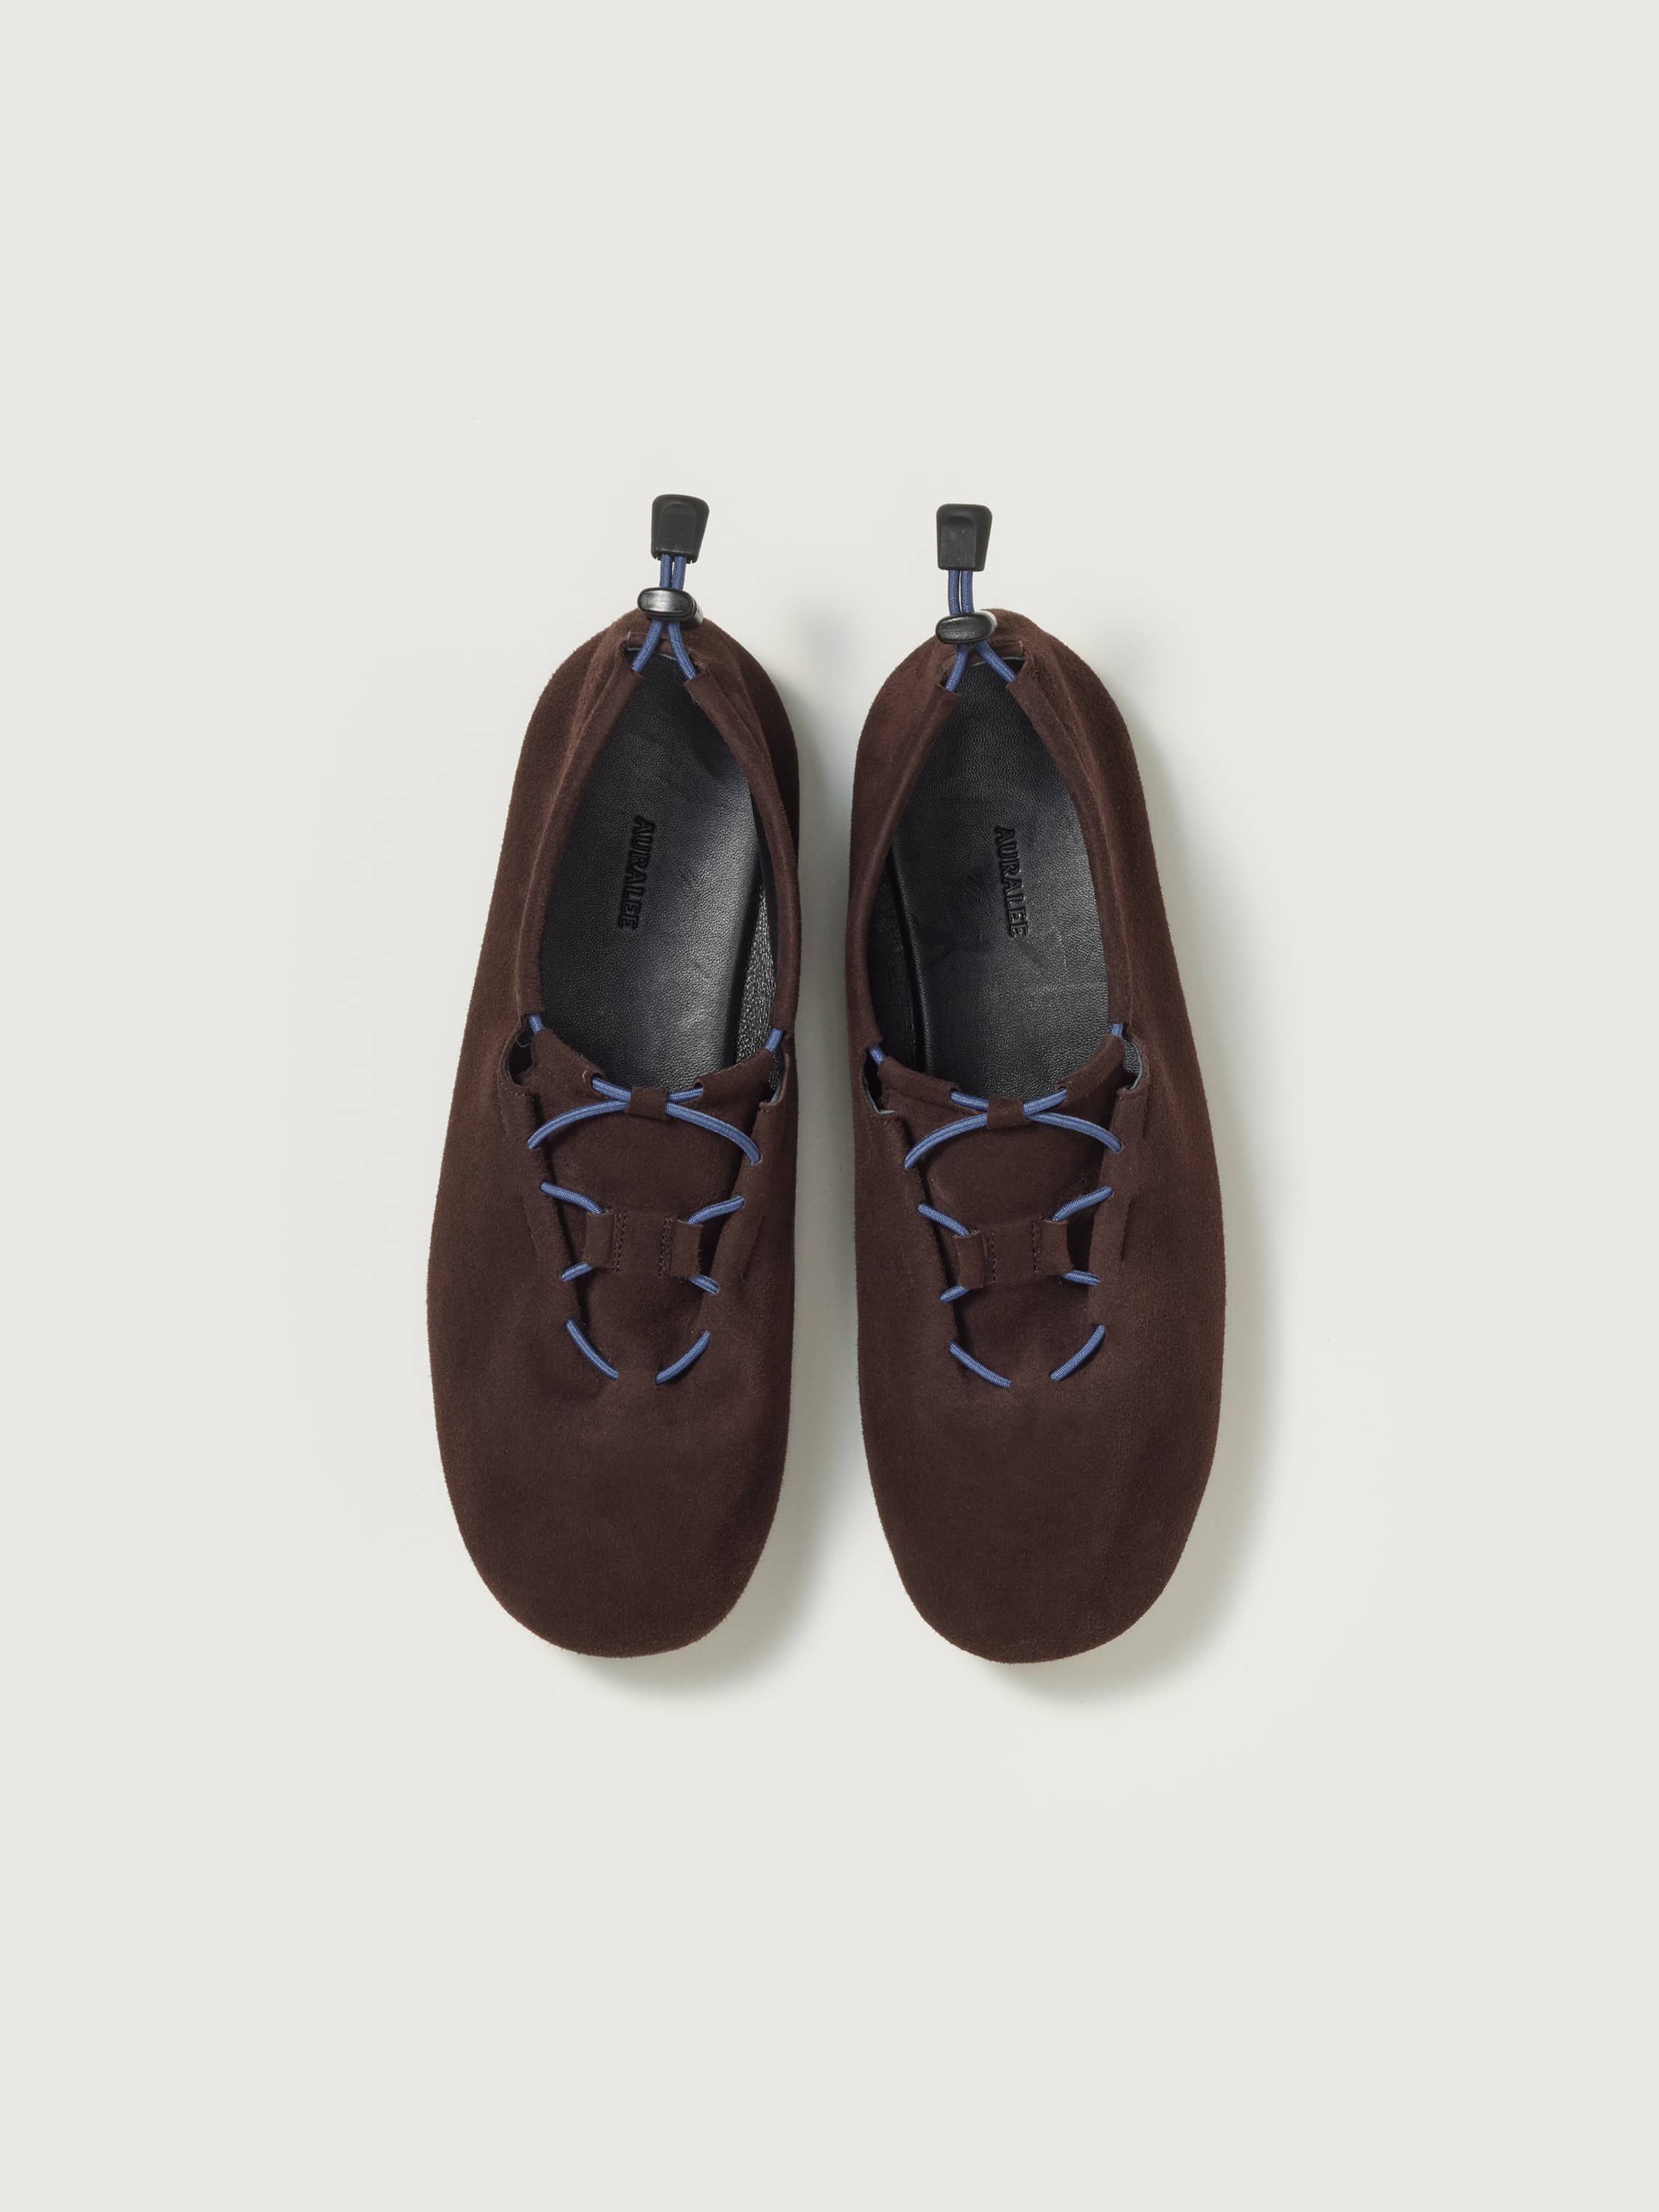 LAMB SUEDE CORD SHOES MADE BY FOOT THE COACHER 詳細画像 DARK BROWN 2